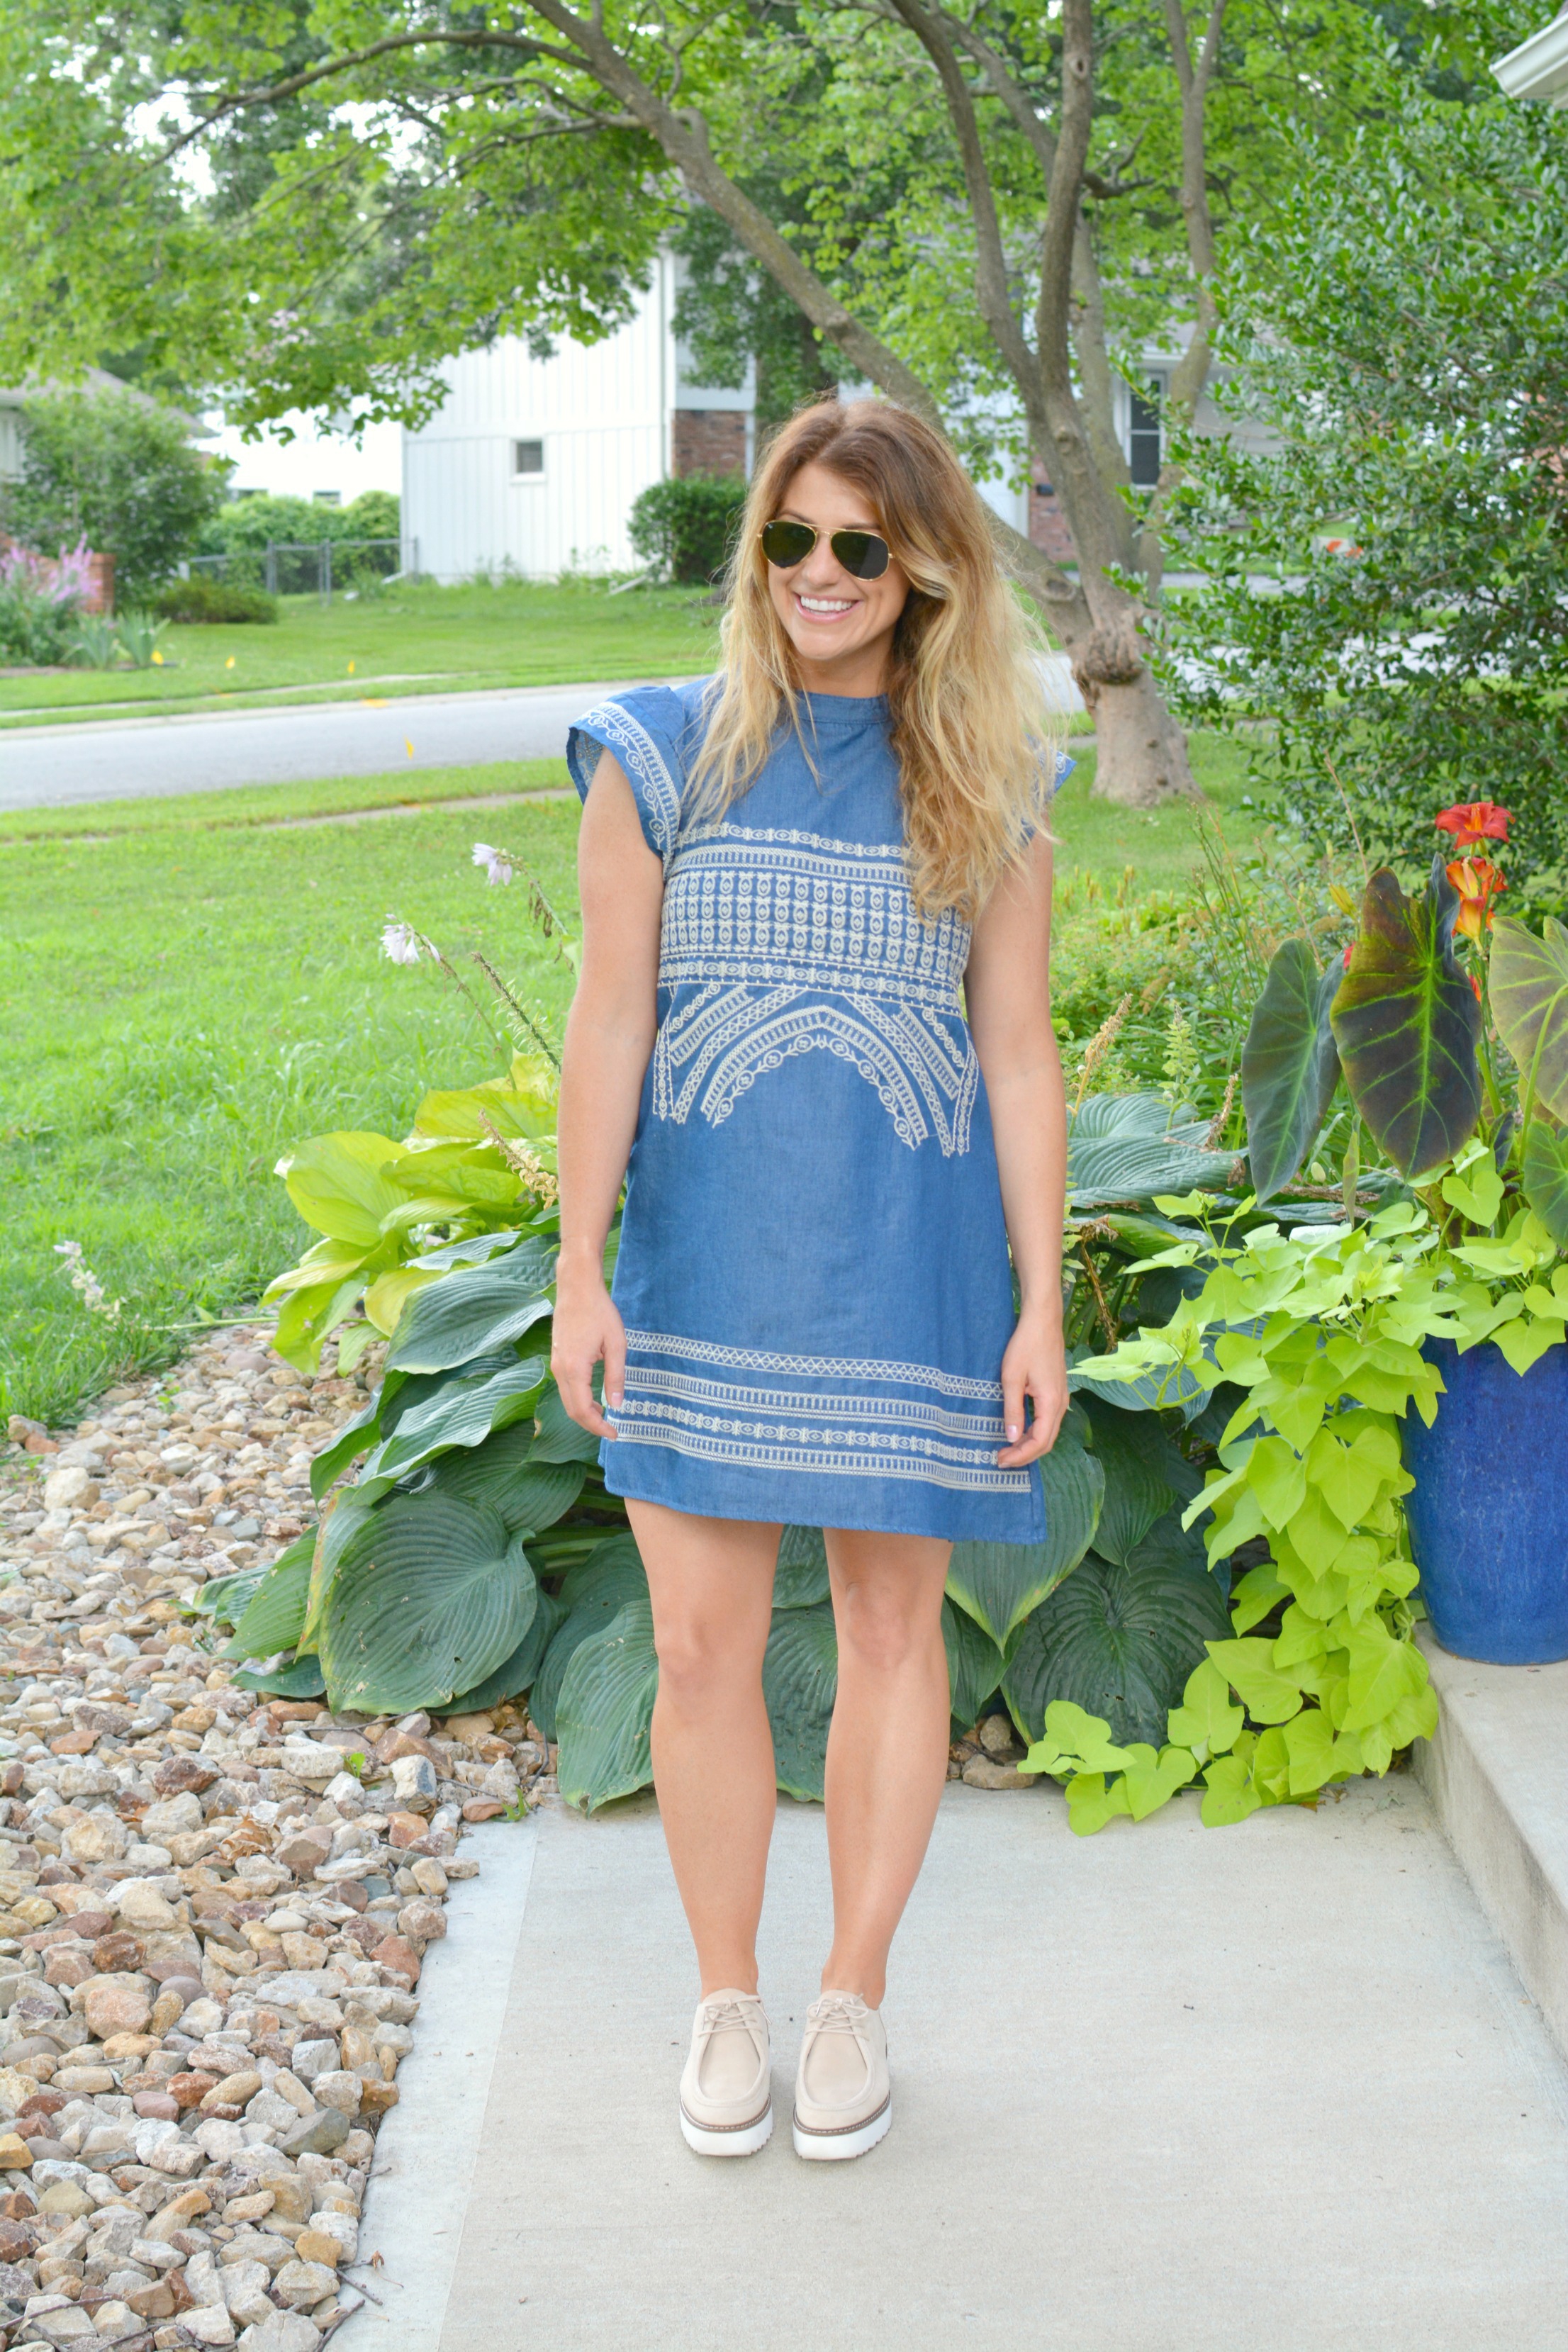 Embroidered Chambray Dress. | Le Stylo Rouge